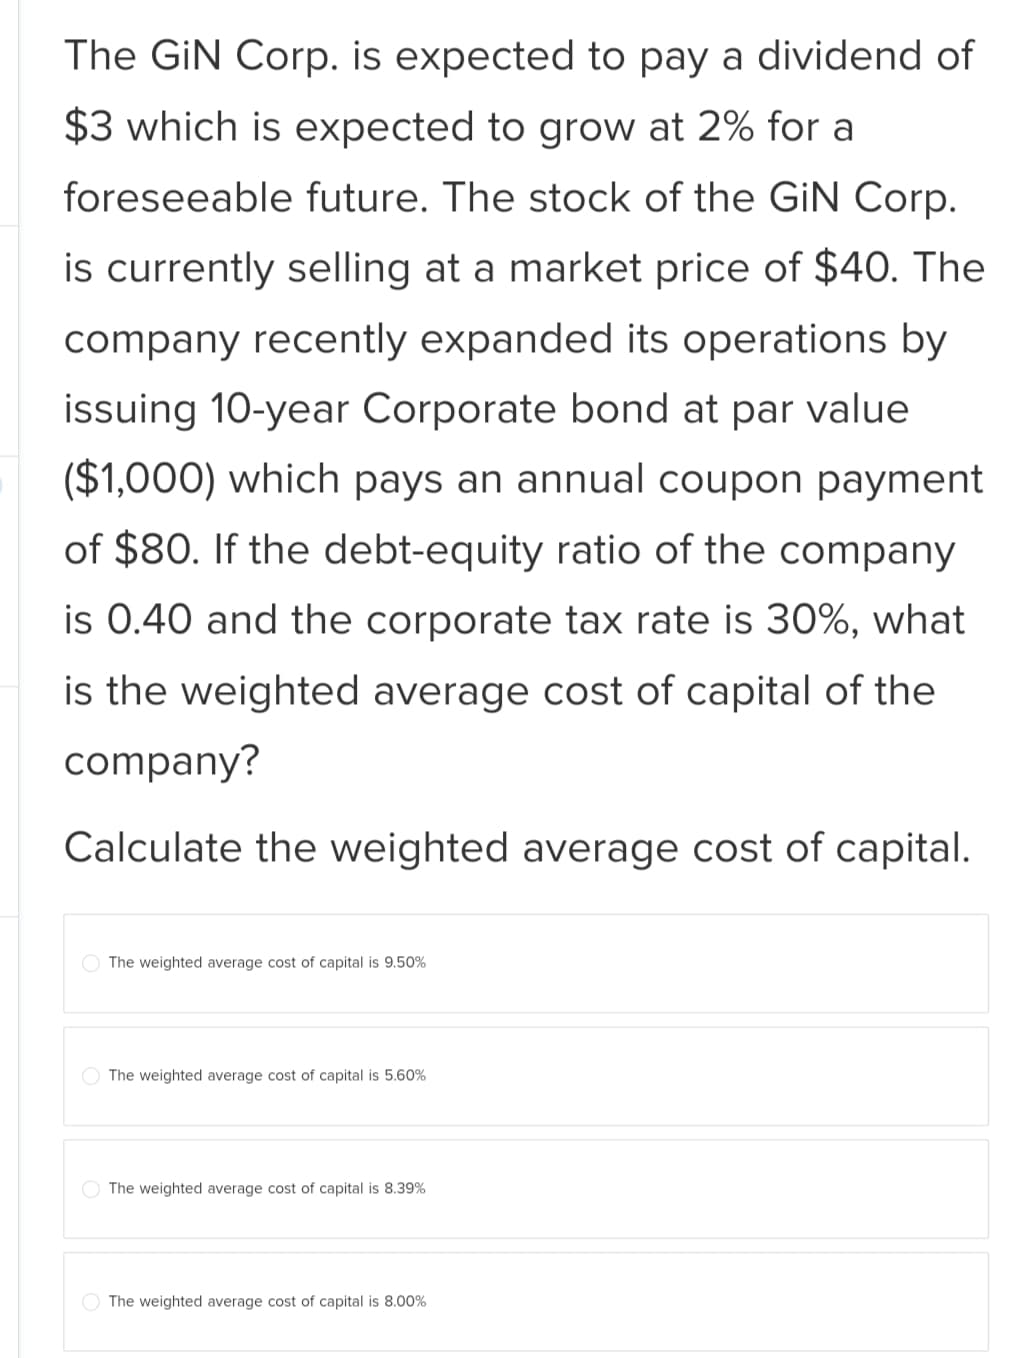 The GiN Corp. is expected to pay a dividend of
$3 which is expected to grow at 2% for a
foreseeable future. The stock of the GiN Corp.
is currently selling at a market price of $40. The
company recently expanded its operations by
issuing 10-year Corporate bond at par value
($1,000) which pays an annual coupon payment
of $80. If the debt-equity ratio of the company
is 0.40 and the corporate tax rate is 30%, what
is the weighted average cost of capital of the
company?
Calculate the weighted average cost of capital.
The weighted average cost of capital is 9.50%
The weighted average cost of capital is 5.60%
The weighted average cost of capital is 8.39%
The weighted average cost of capital is 8.00%